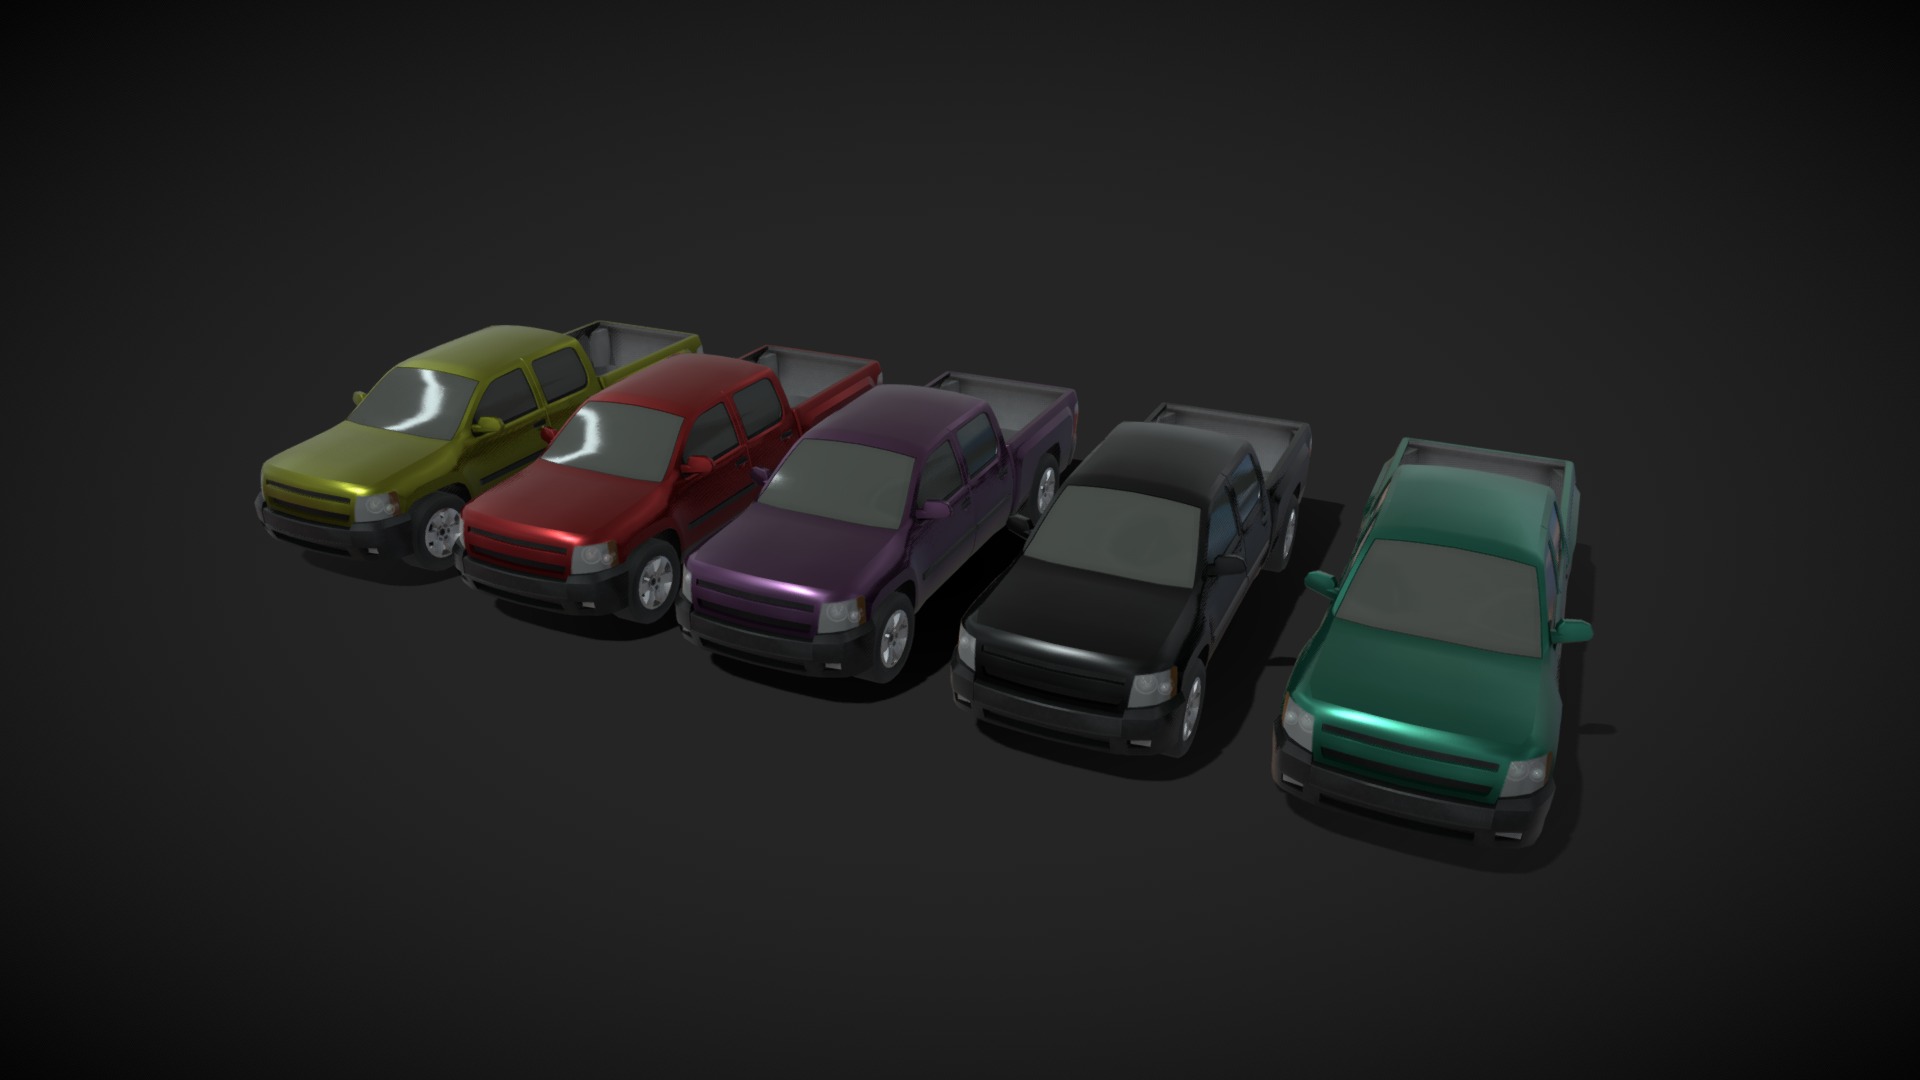 3D model Pickup Truck Car Generic Lowpoly 3D Model - This is a 3D model of the Pickup Truck Car Generic Lowpoly 3D Model. The 3D model is about a group of toy cars.